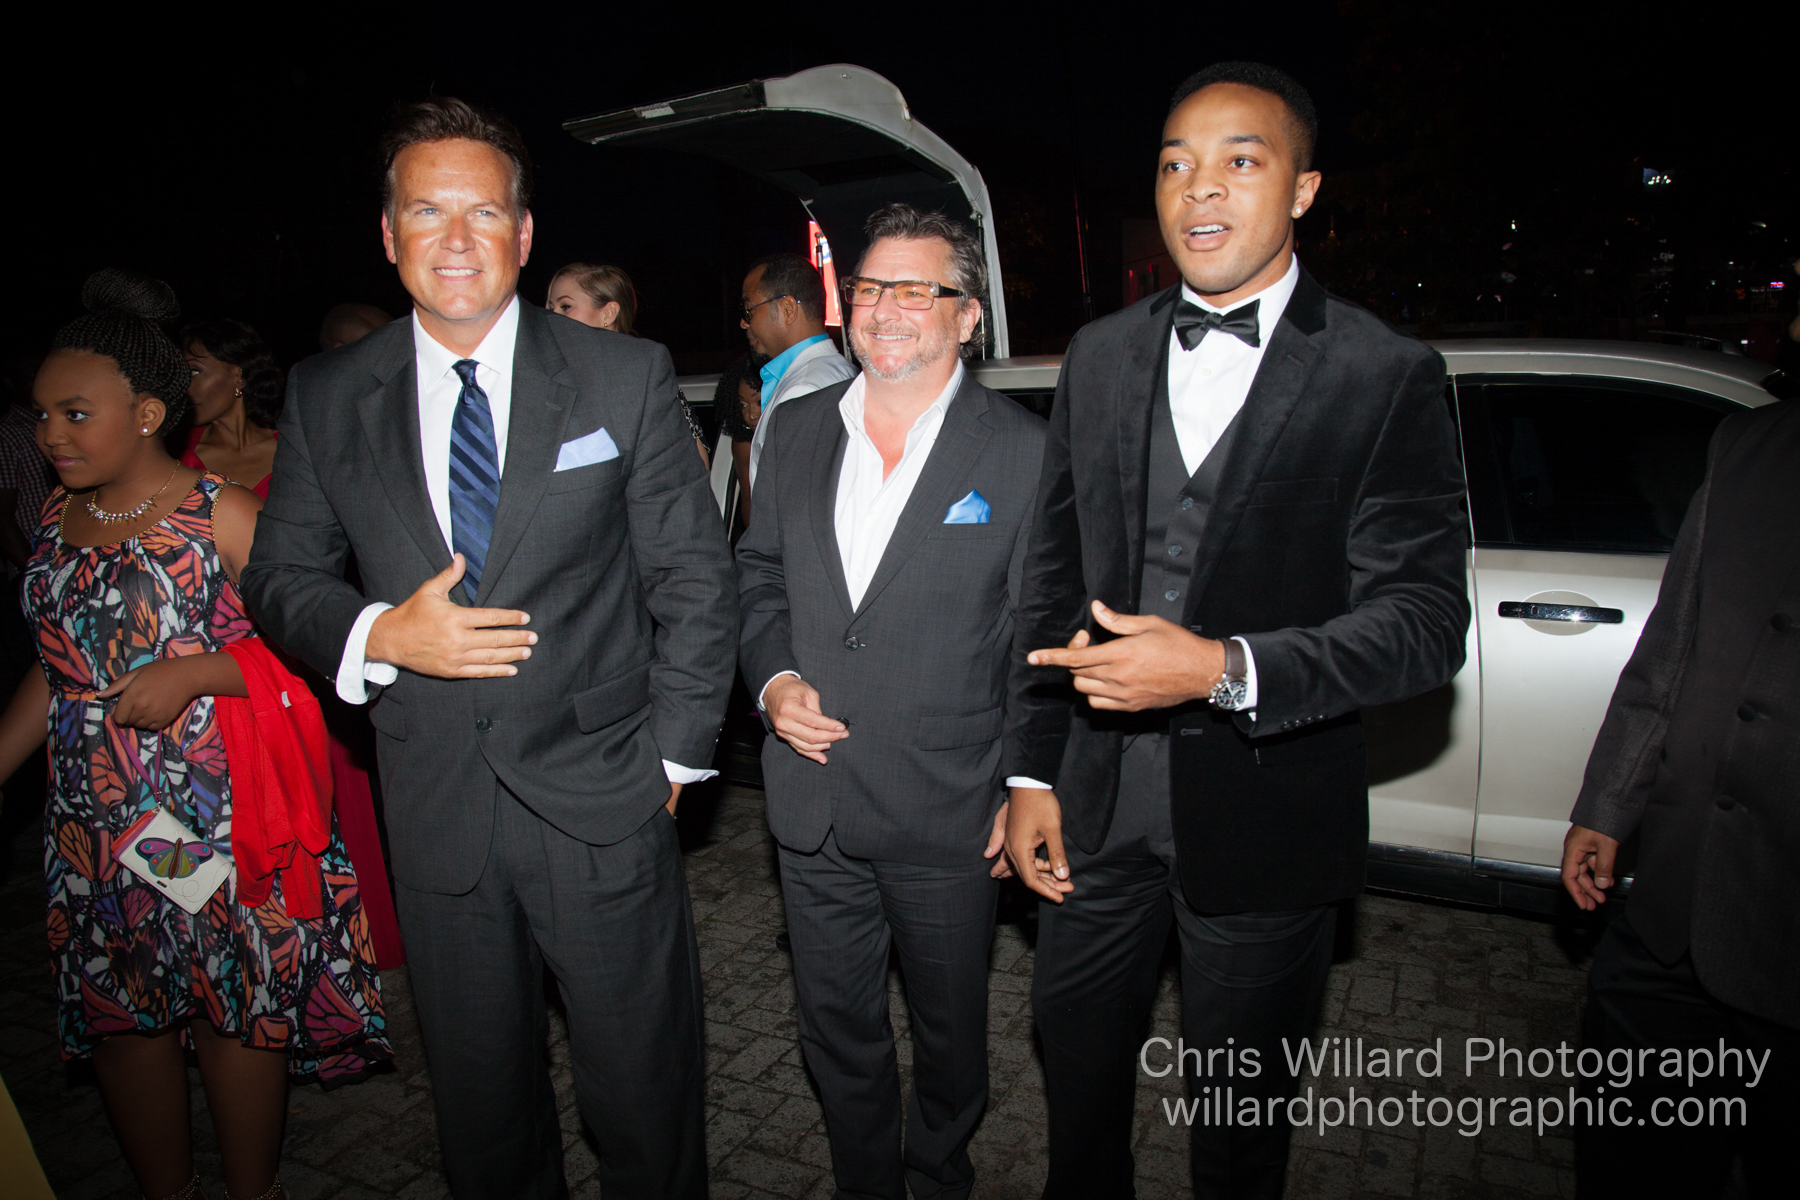 At the red carpet event for Tempting Fate in Lagos, Nigeria. From L to R - Dan Davies, John J Vogel, Andrew Onochie